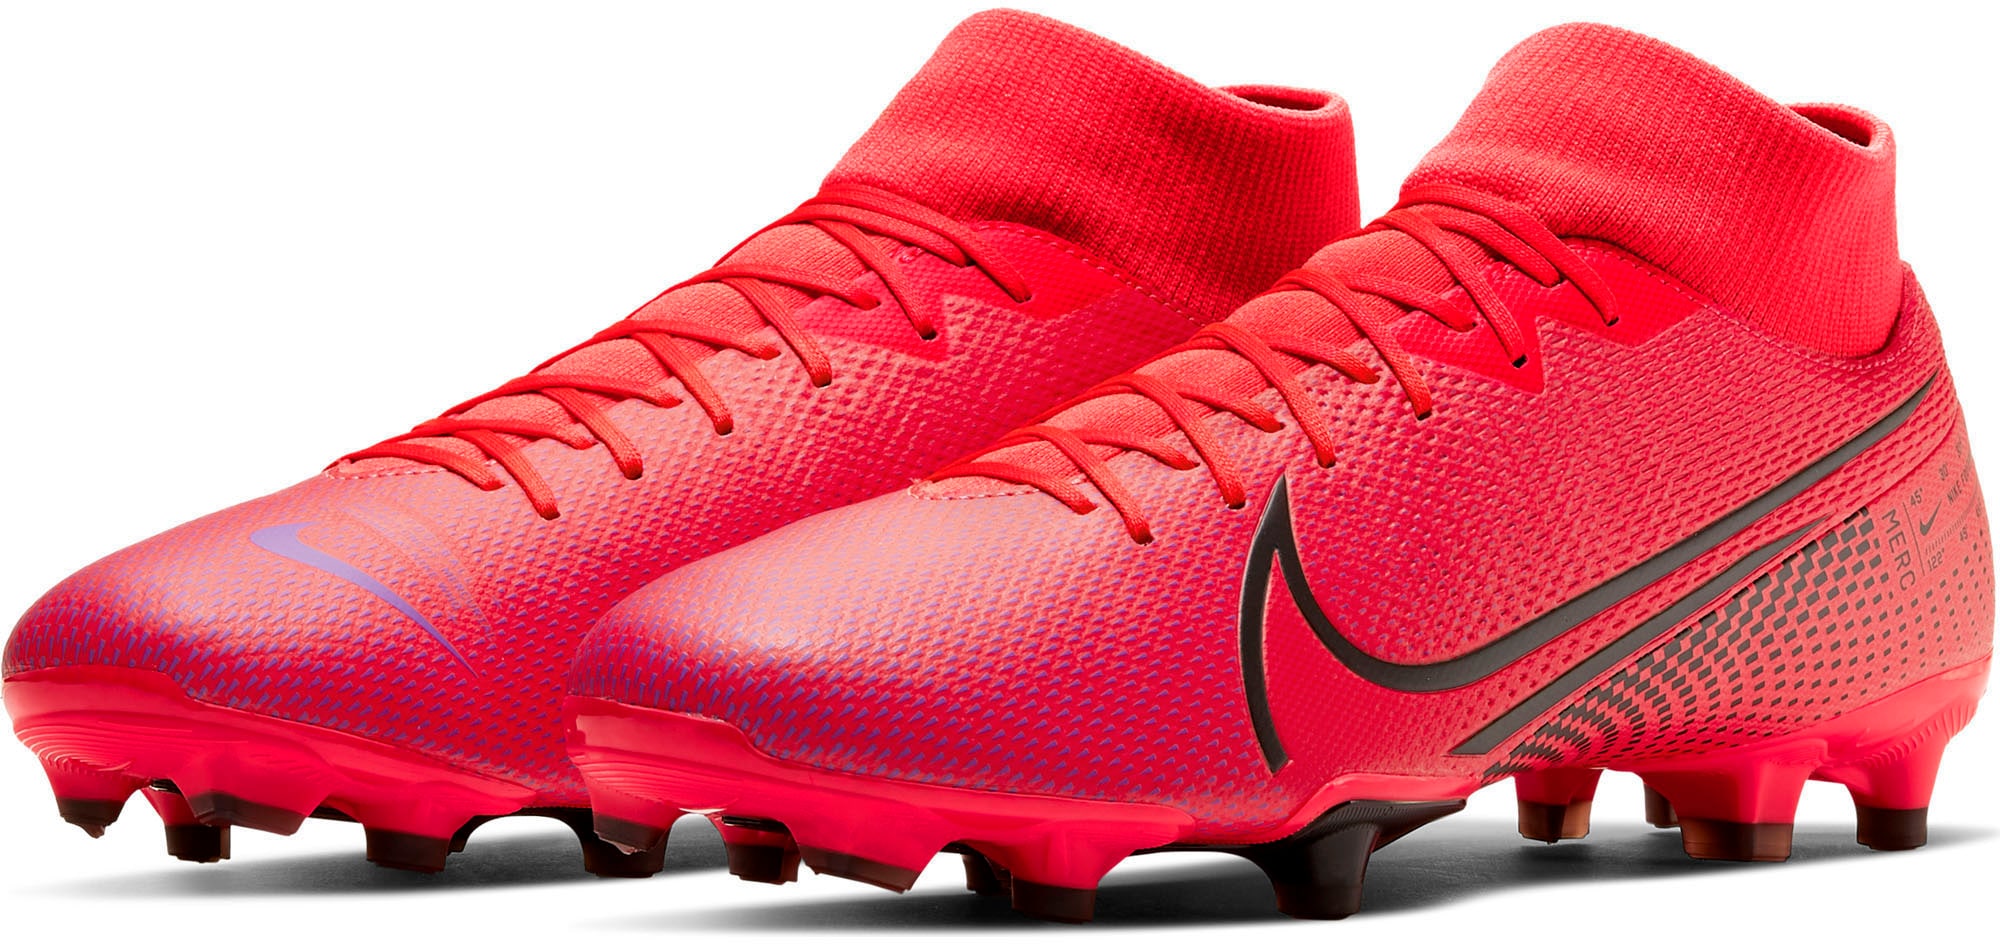 Nike »Mercurial Superfly Academy MG« bei Universal.at